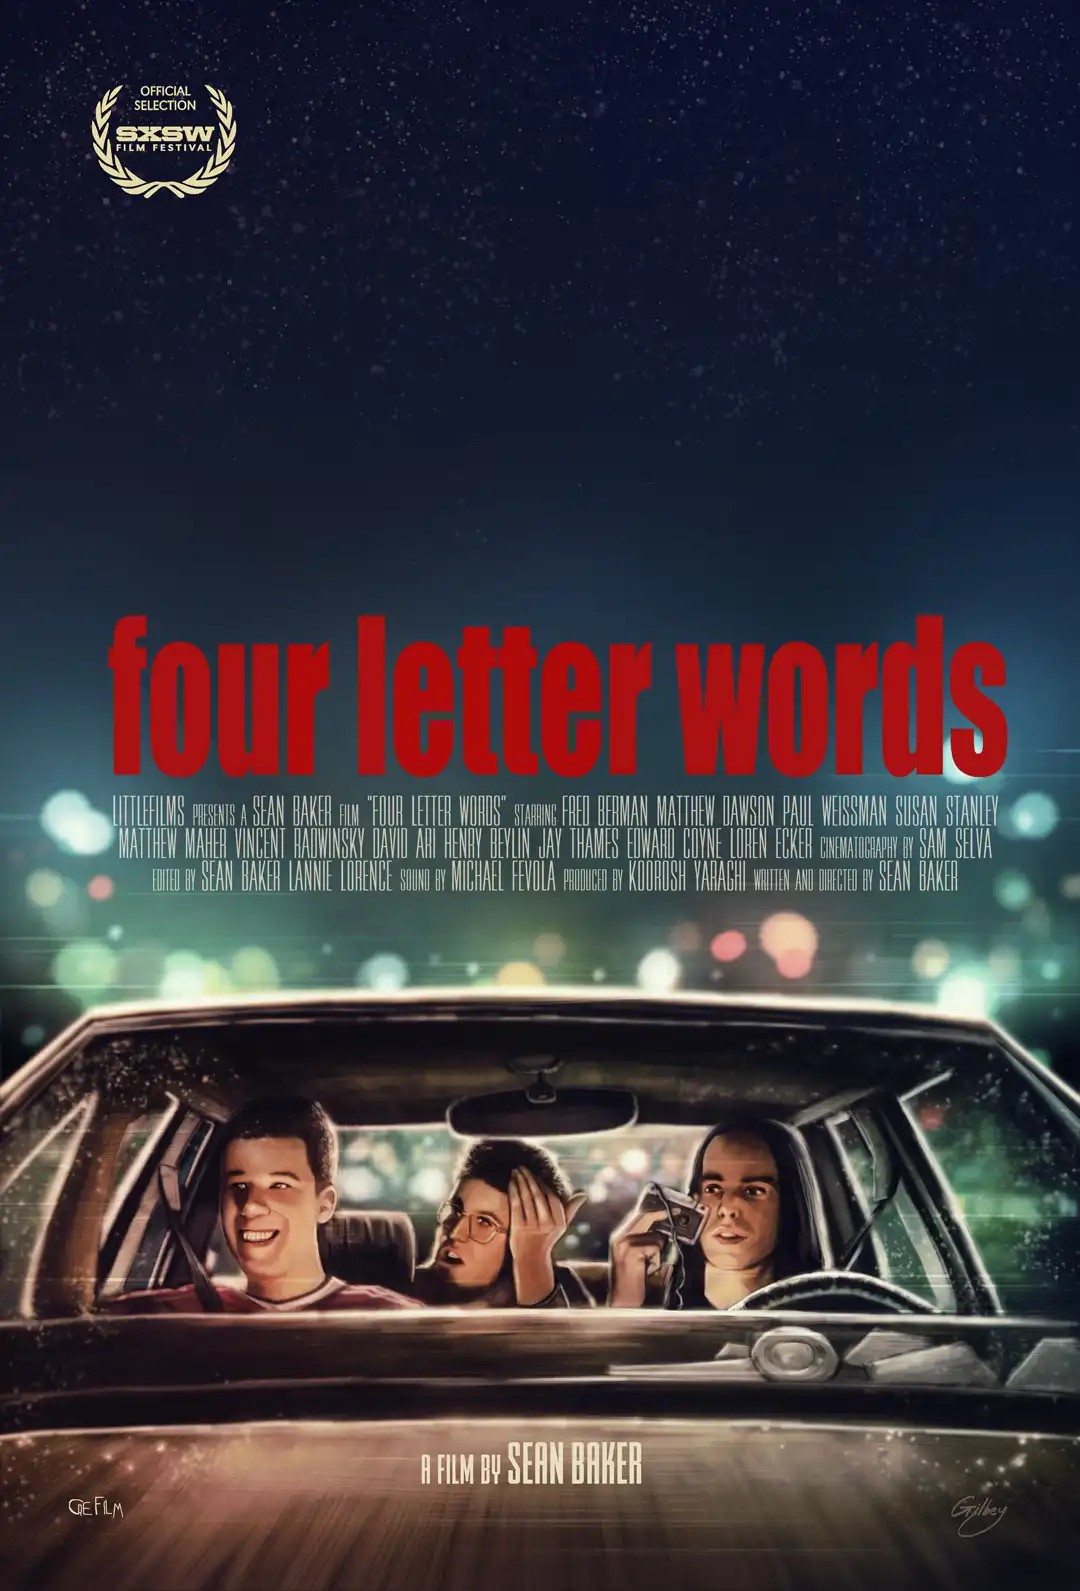 Watch and Download Four Letter Words 3